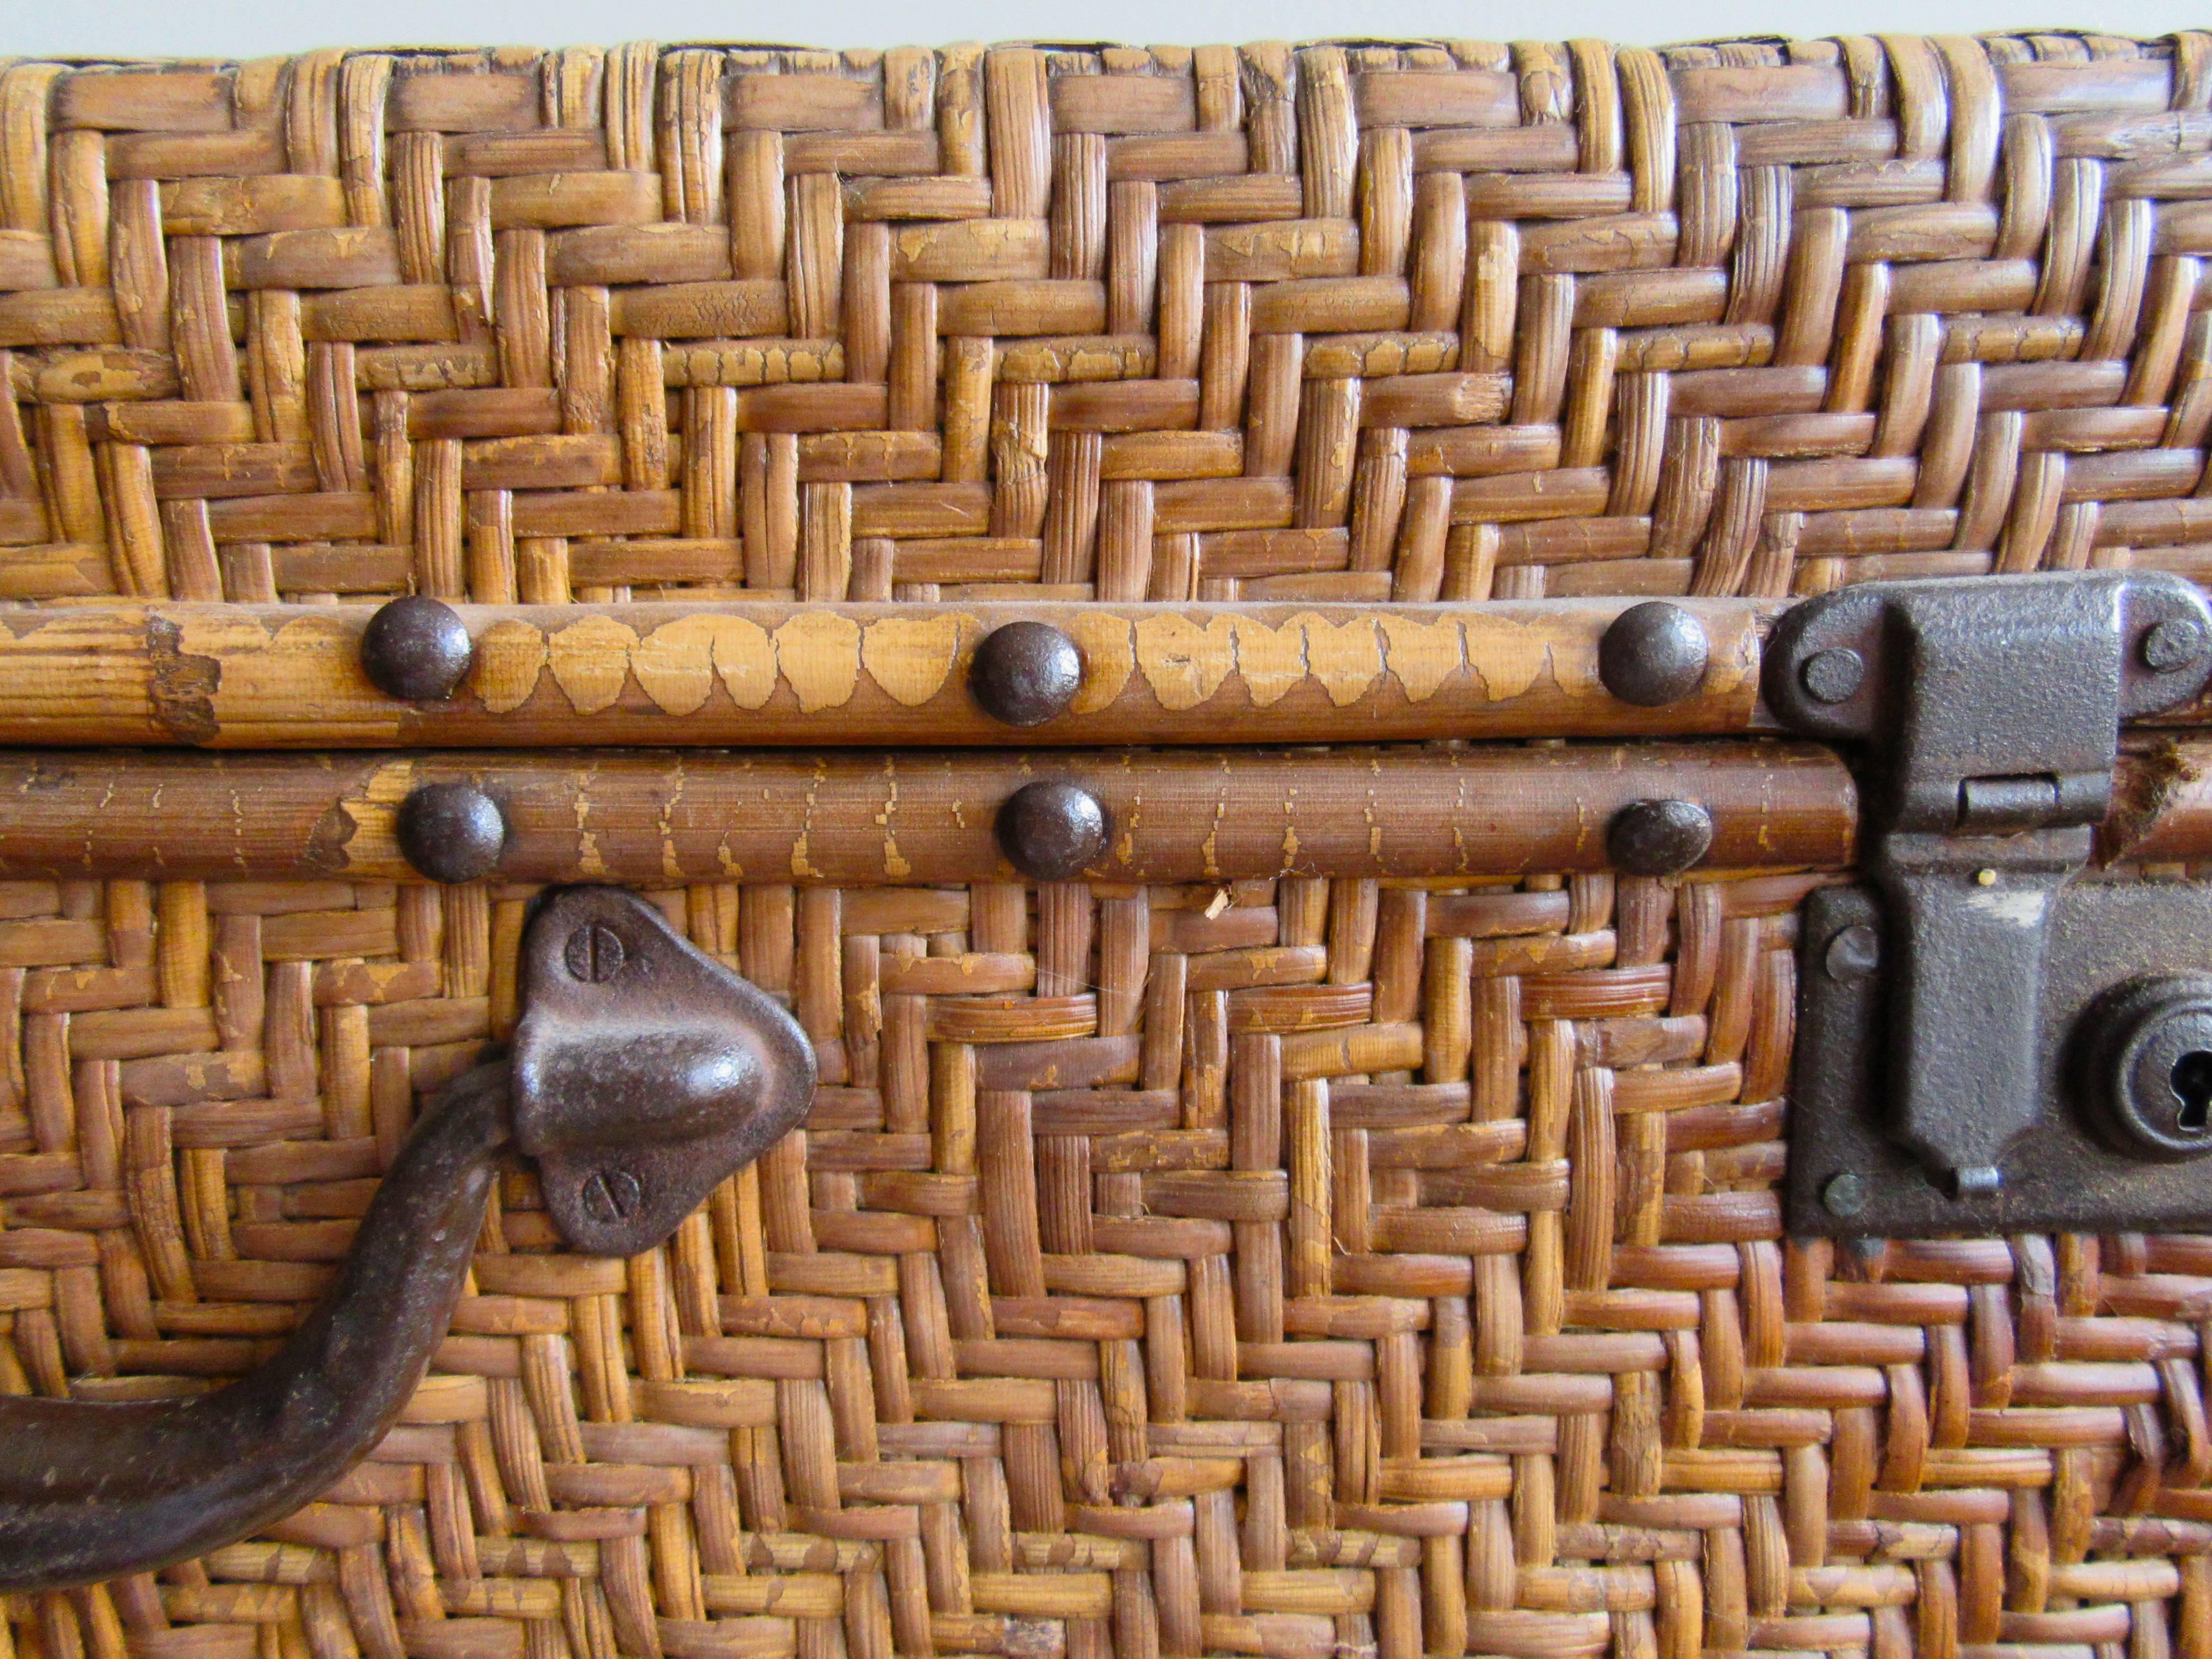 Two suitcases constructed of rattan applied over a wooden form with original hardware.